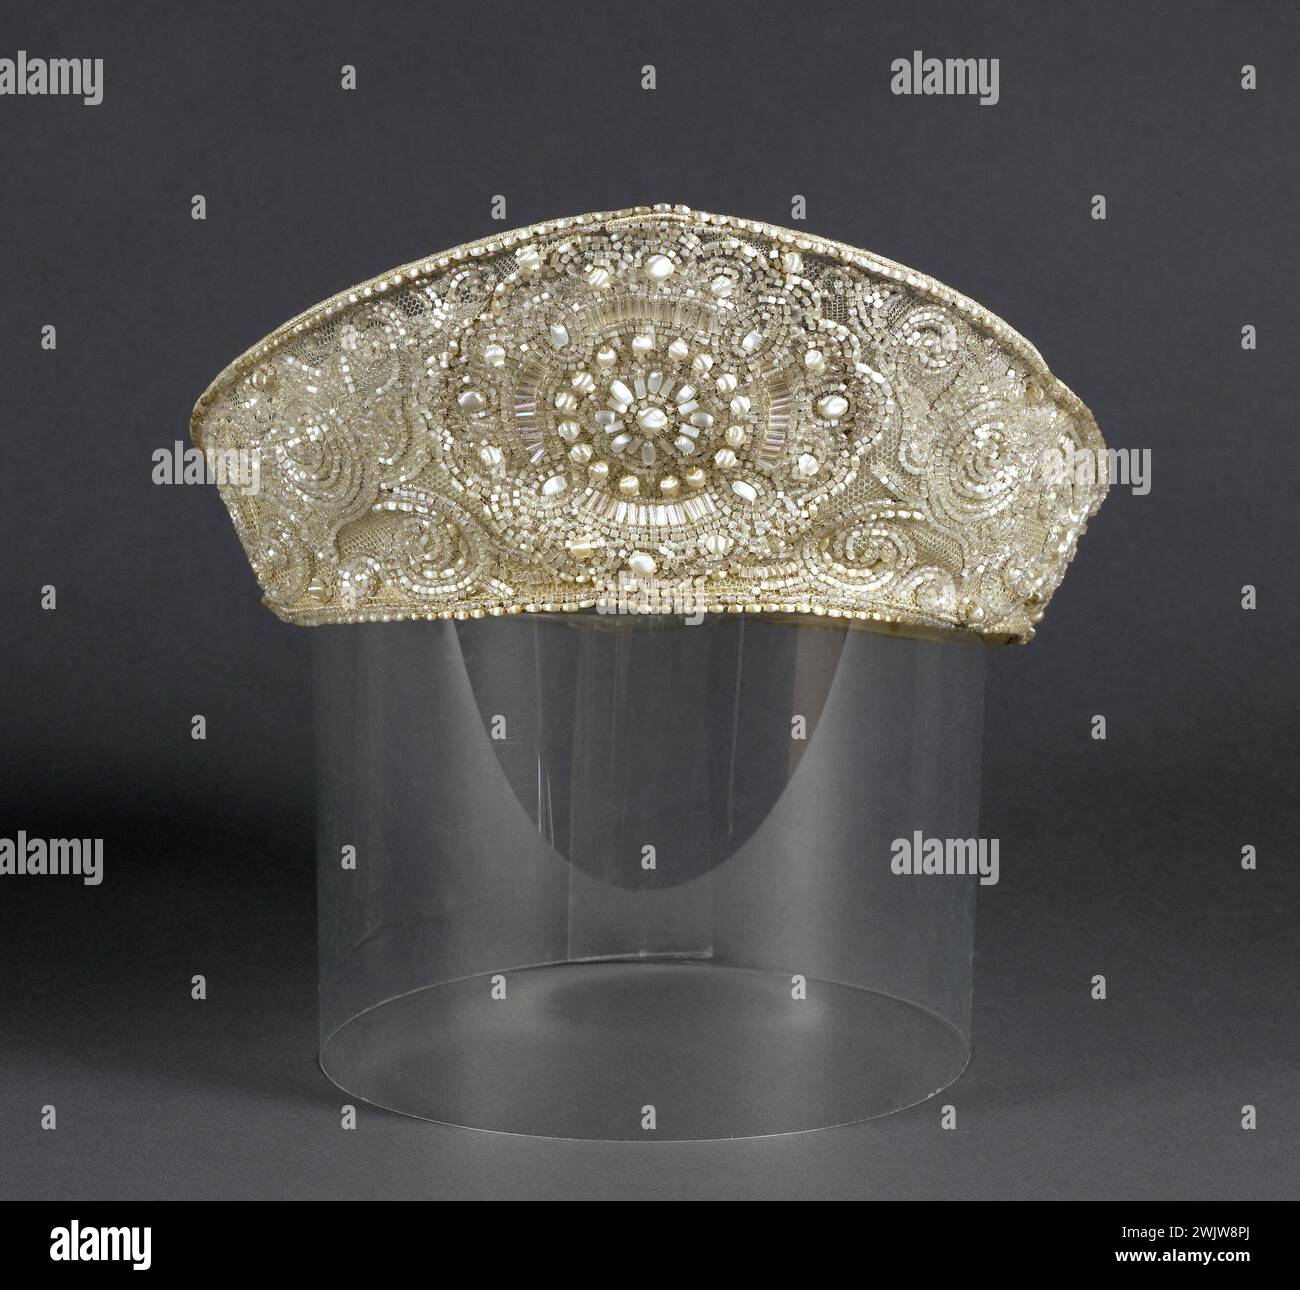 Bridal tiara. Metan, satin, mother -of -pearl. 1913. Galliera, fashion museum of the city of Paris. 51784-12 Accessory, diademe, woman, married, female fashion, metal, mother -of -pearl, satin Stock Photo